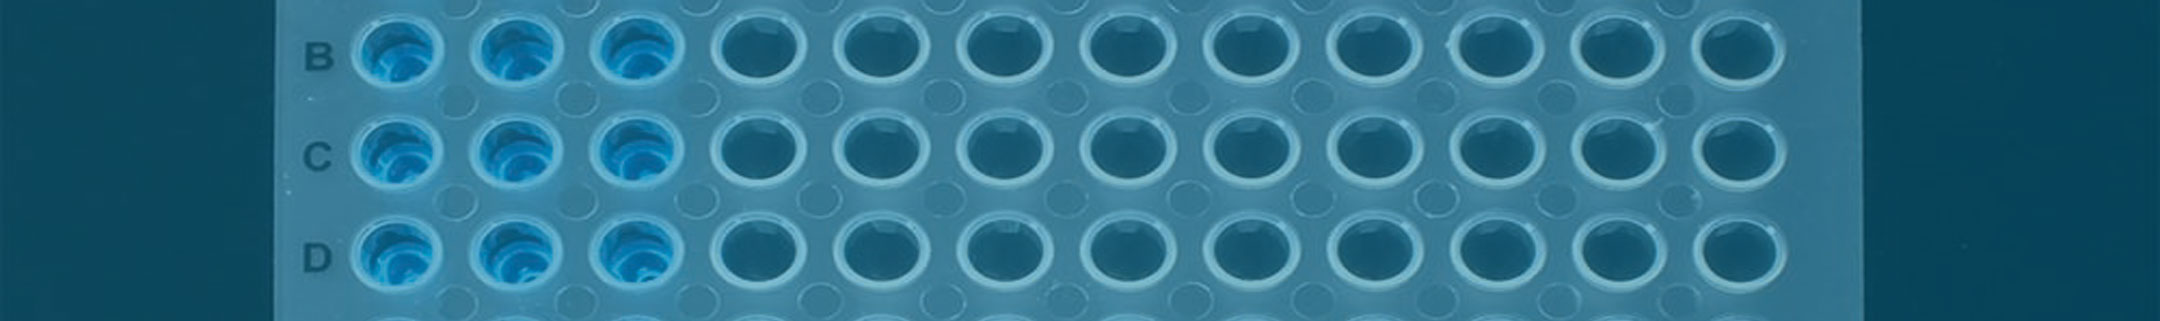 Amplify Non-Skirted 96-Well PCR Plates